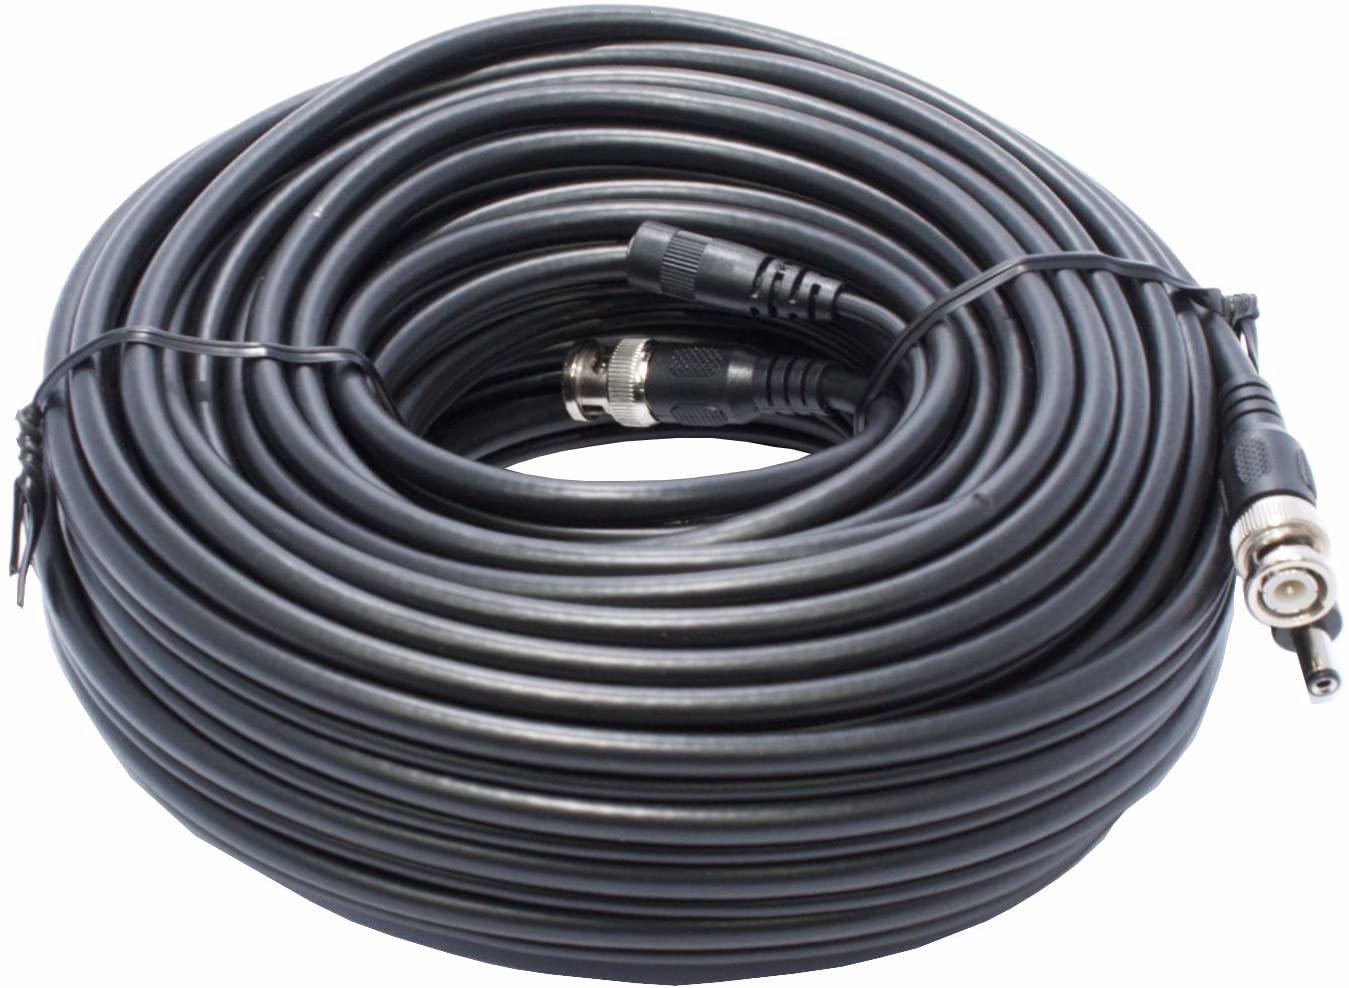 30m RG59+2 Pre-Terminated BNC Video and Power Cable for CCTV Camera - Black